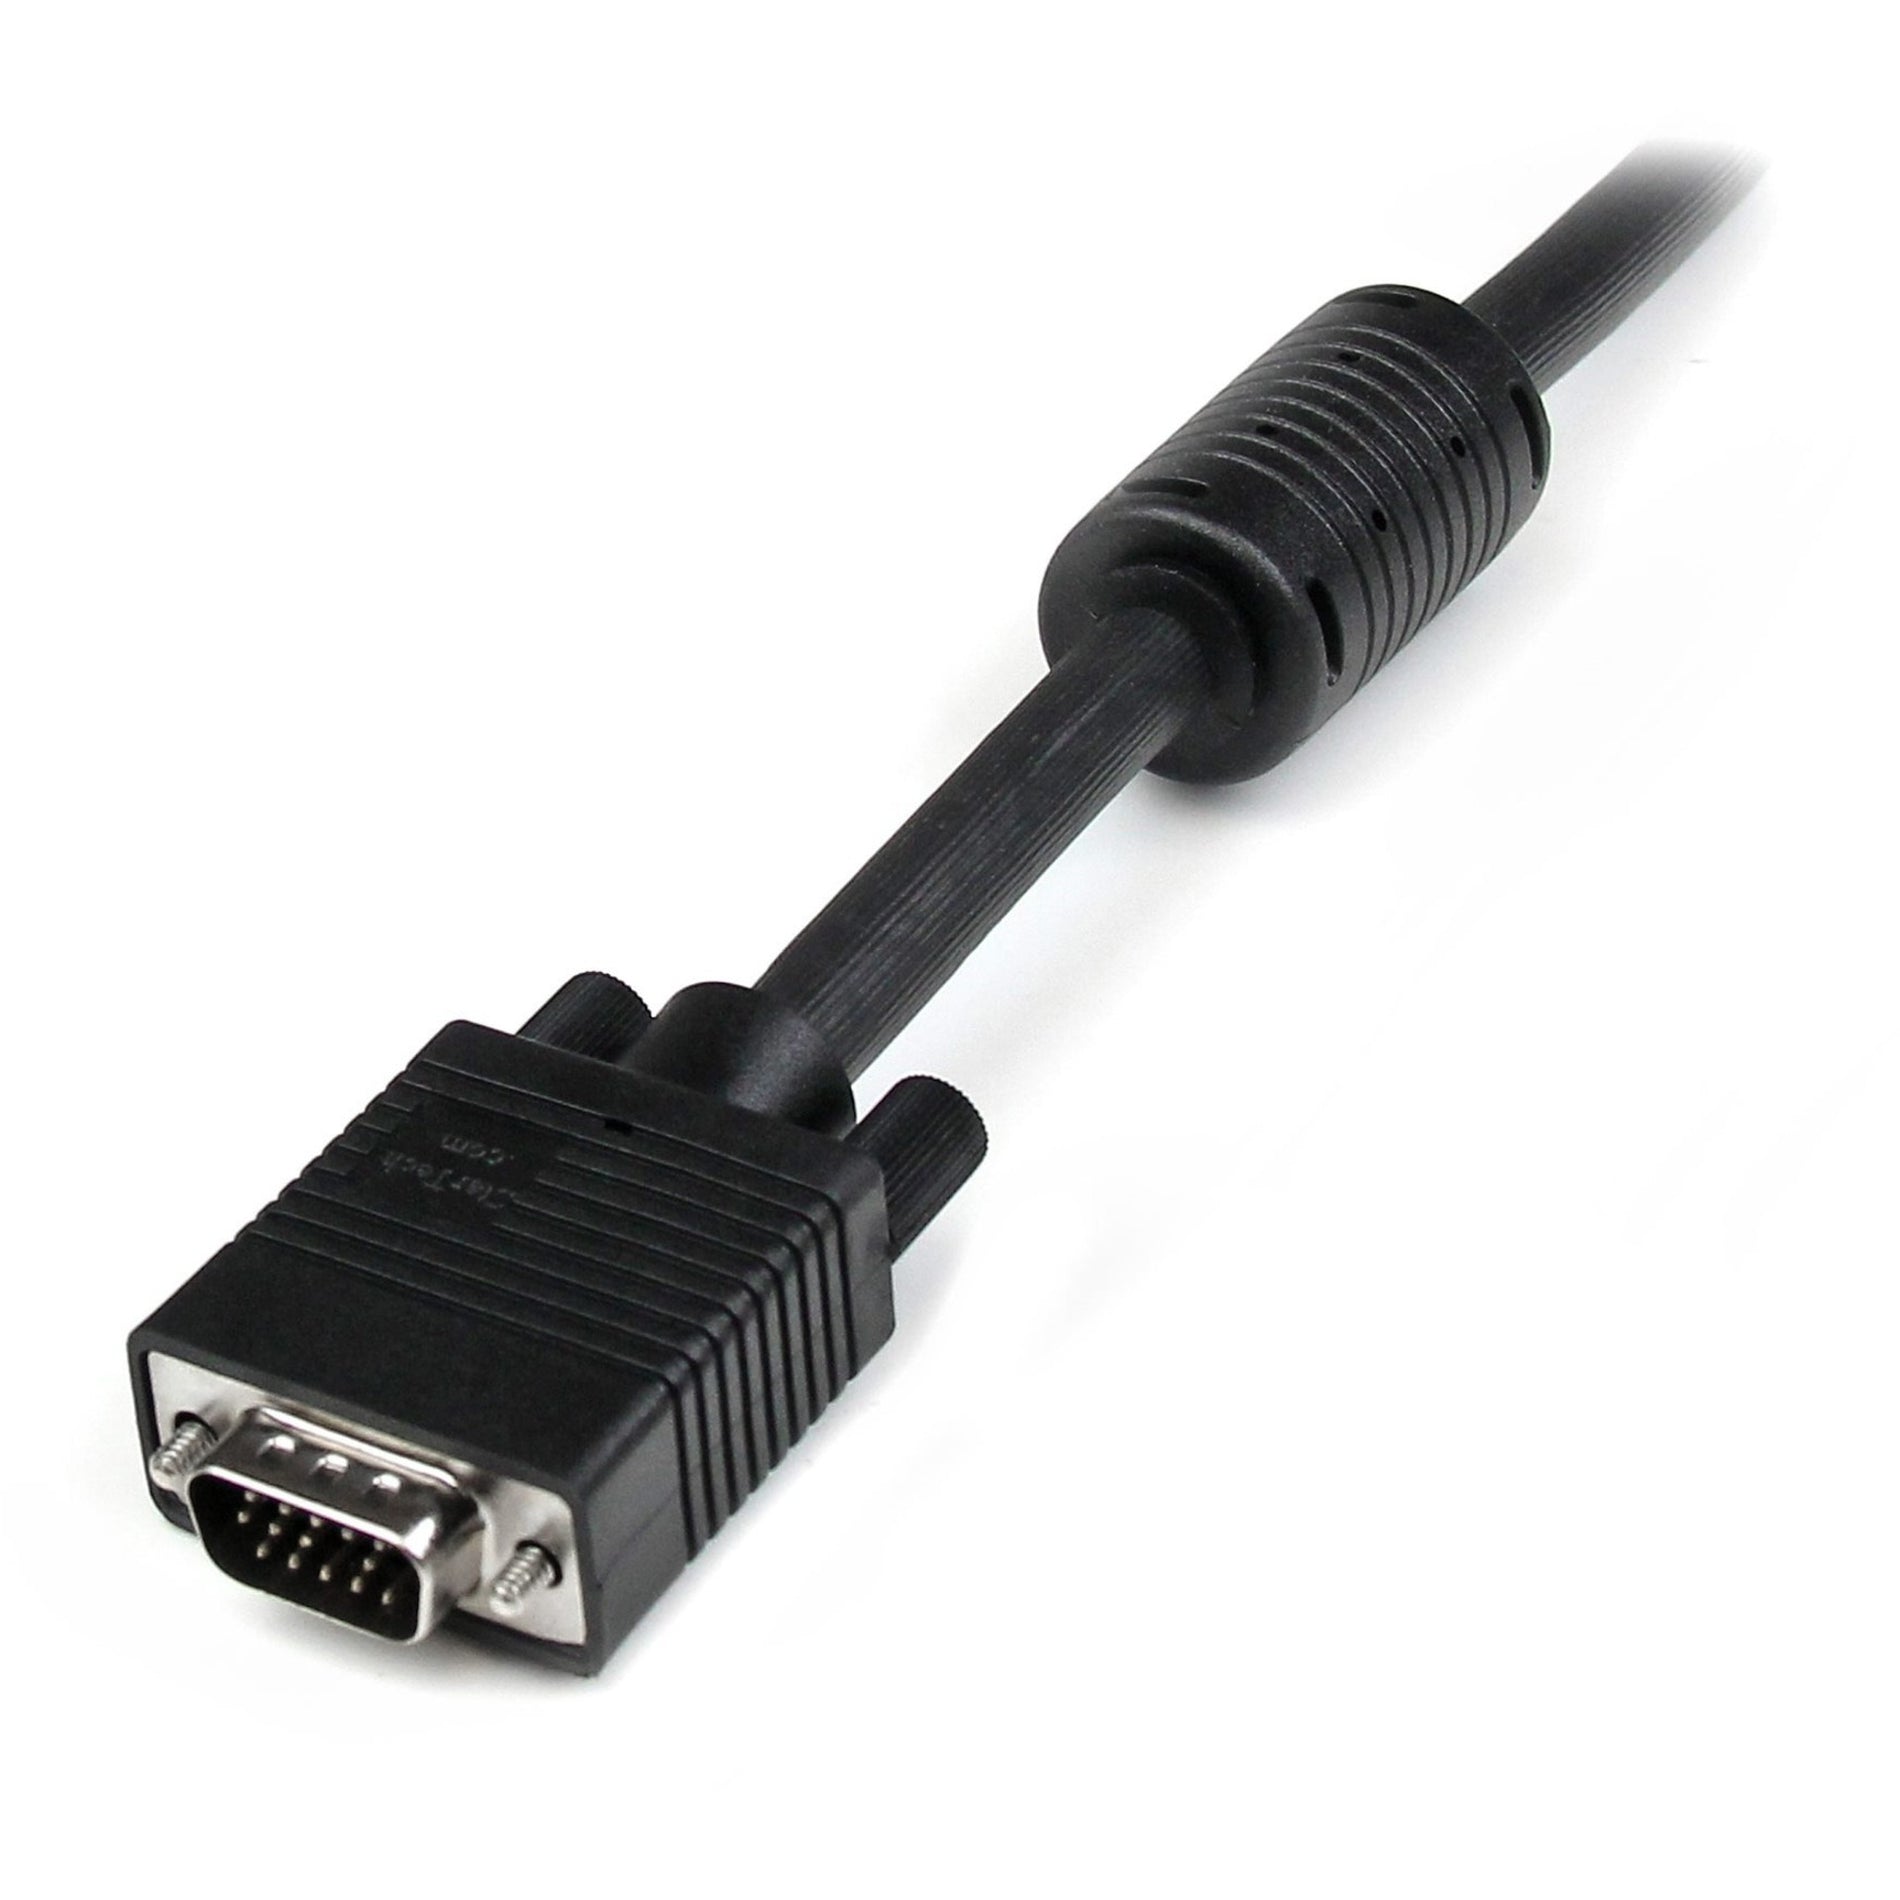 StarTech.com MXT101MMHQ10 10ft Coax High Res Monitor VGA Cable HD15 M/M, Molded, EMI Protection, 1920 x 1200, Black